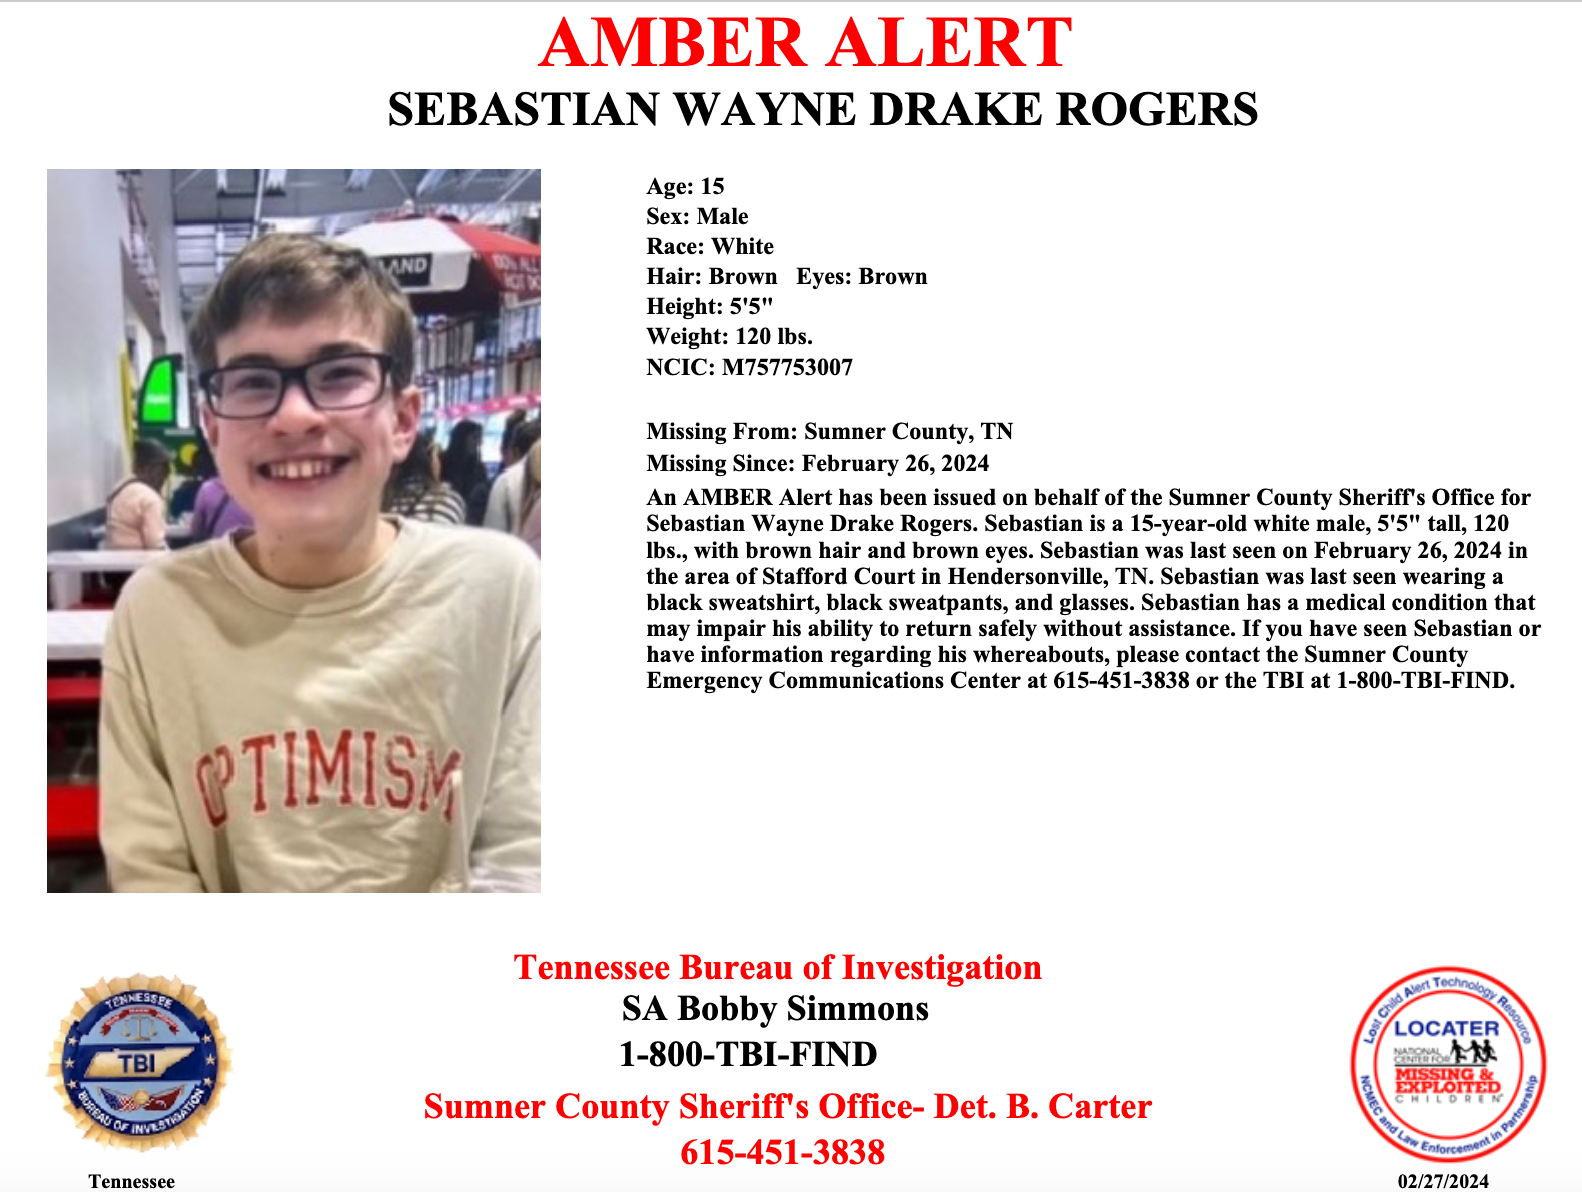 An Amber Alert was issued for Sebastian based on additional investigative information developed during the search